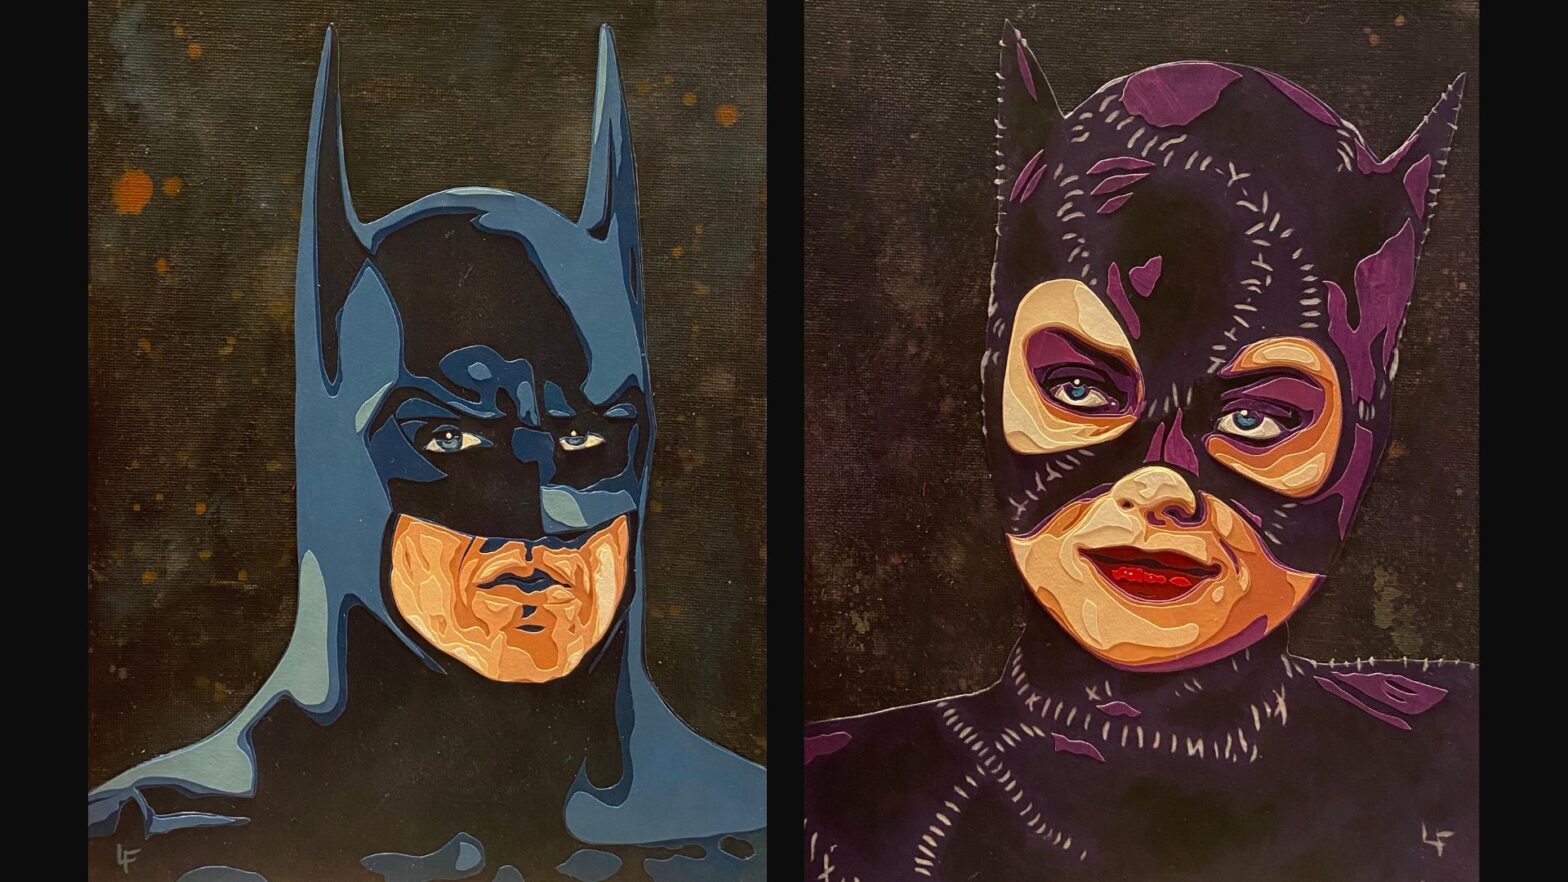 Artwork of Batman and Catwoman was created by artist Lauren Fitzgerald in her collection, "Symbiosis."